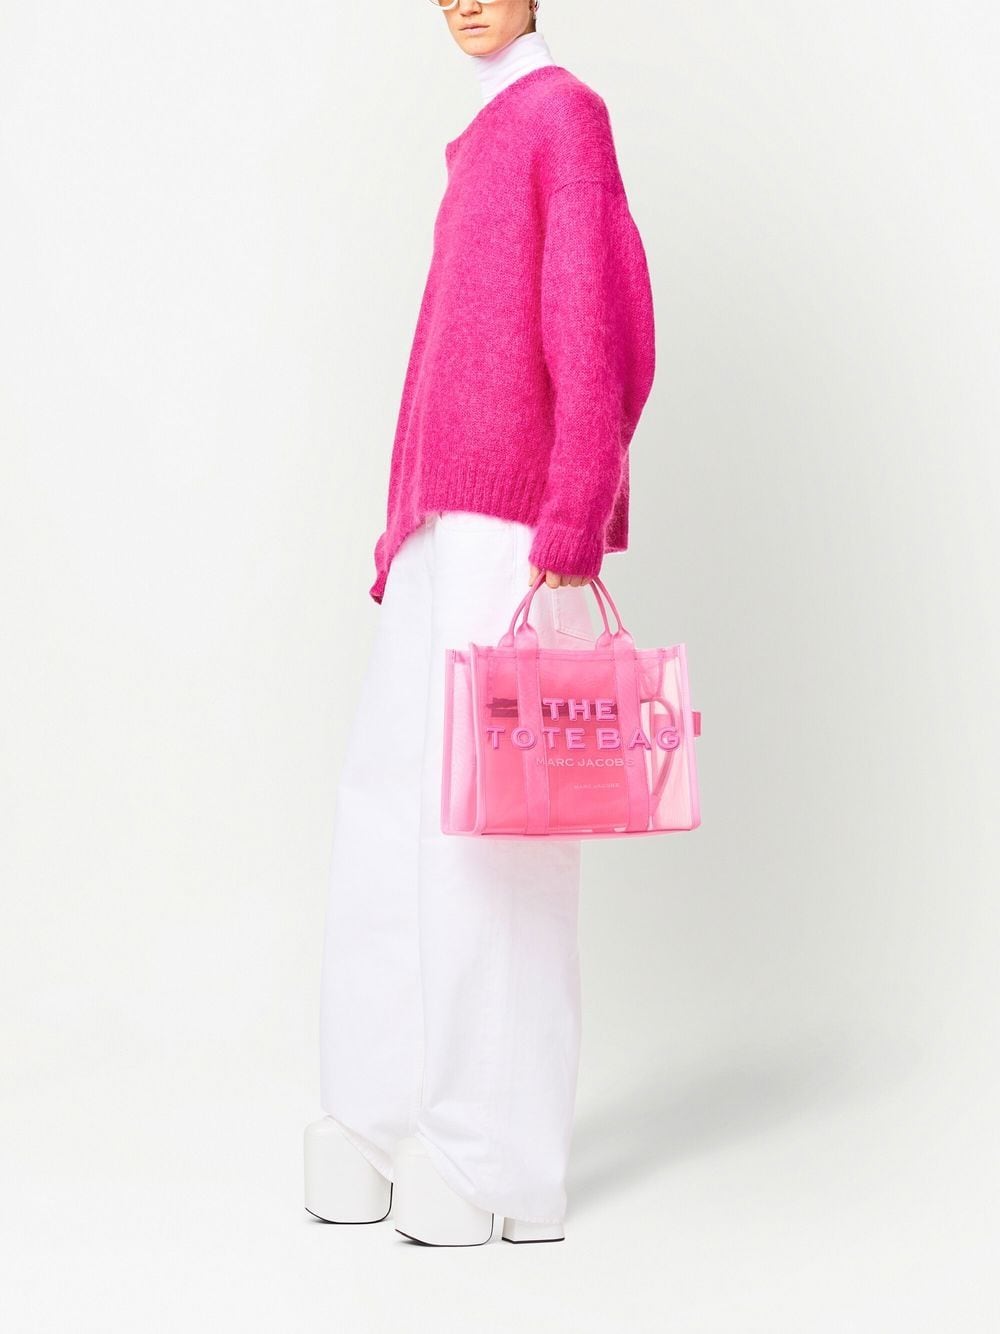 Women's 'the Mesh Medium' Tote Bag by Marc Jacobs